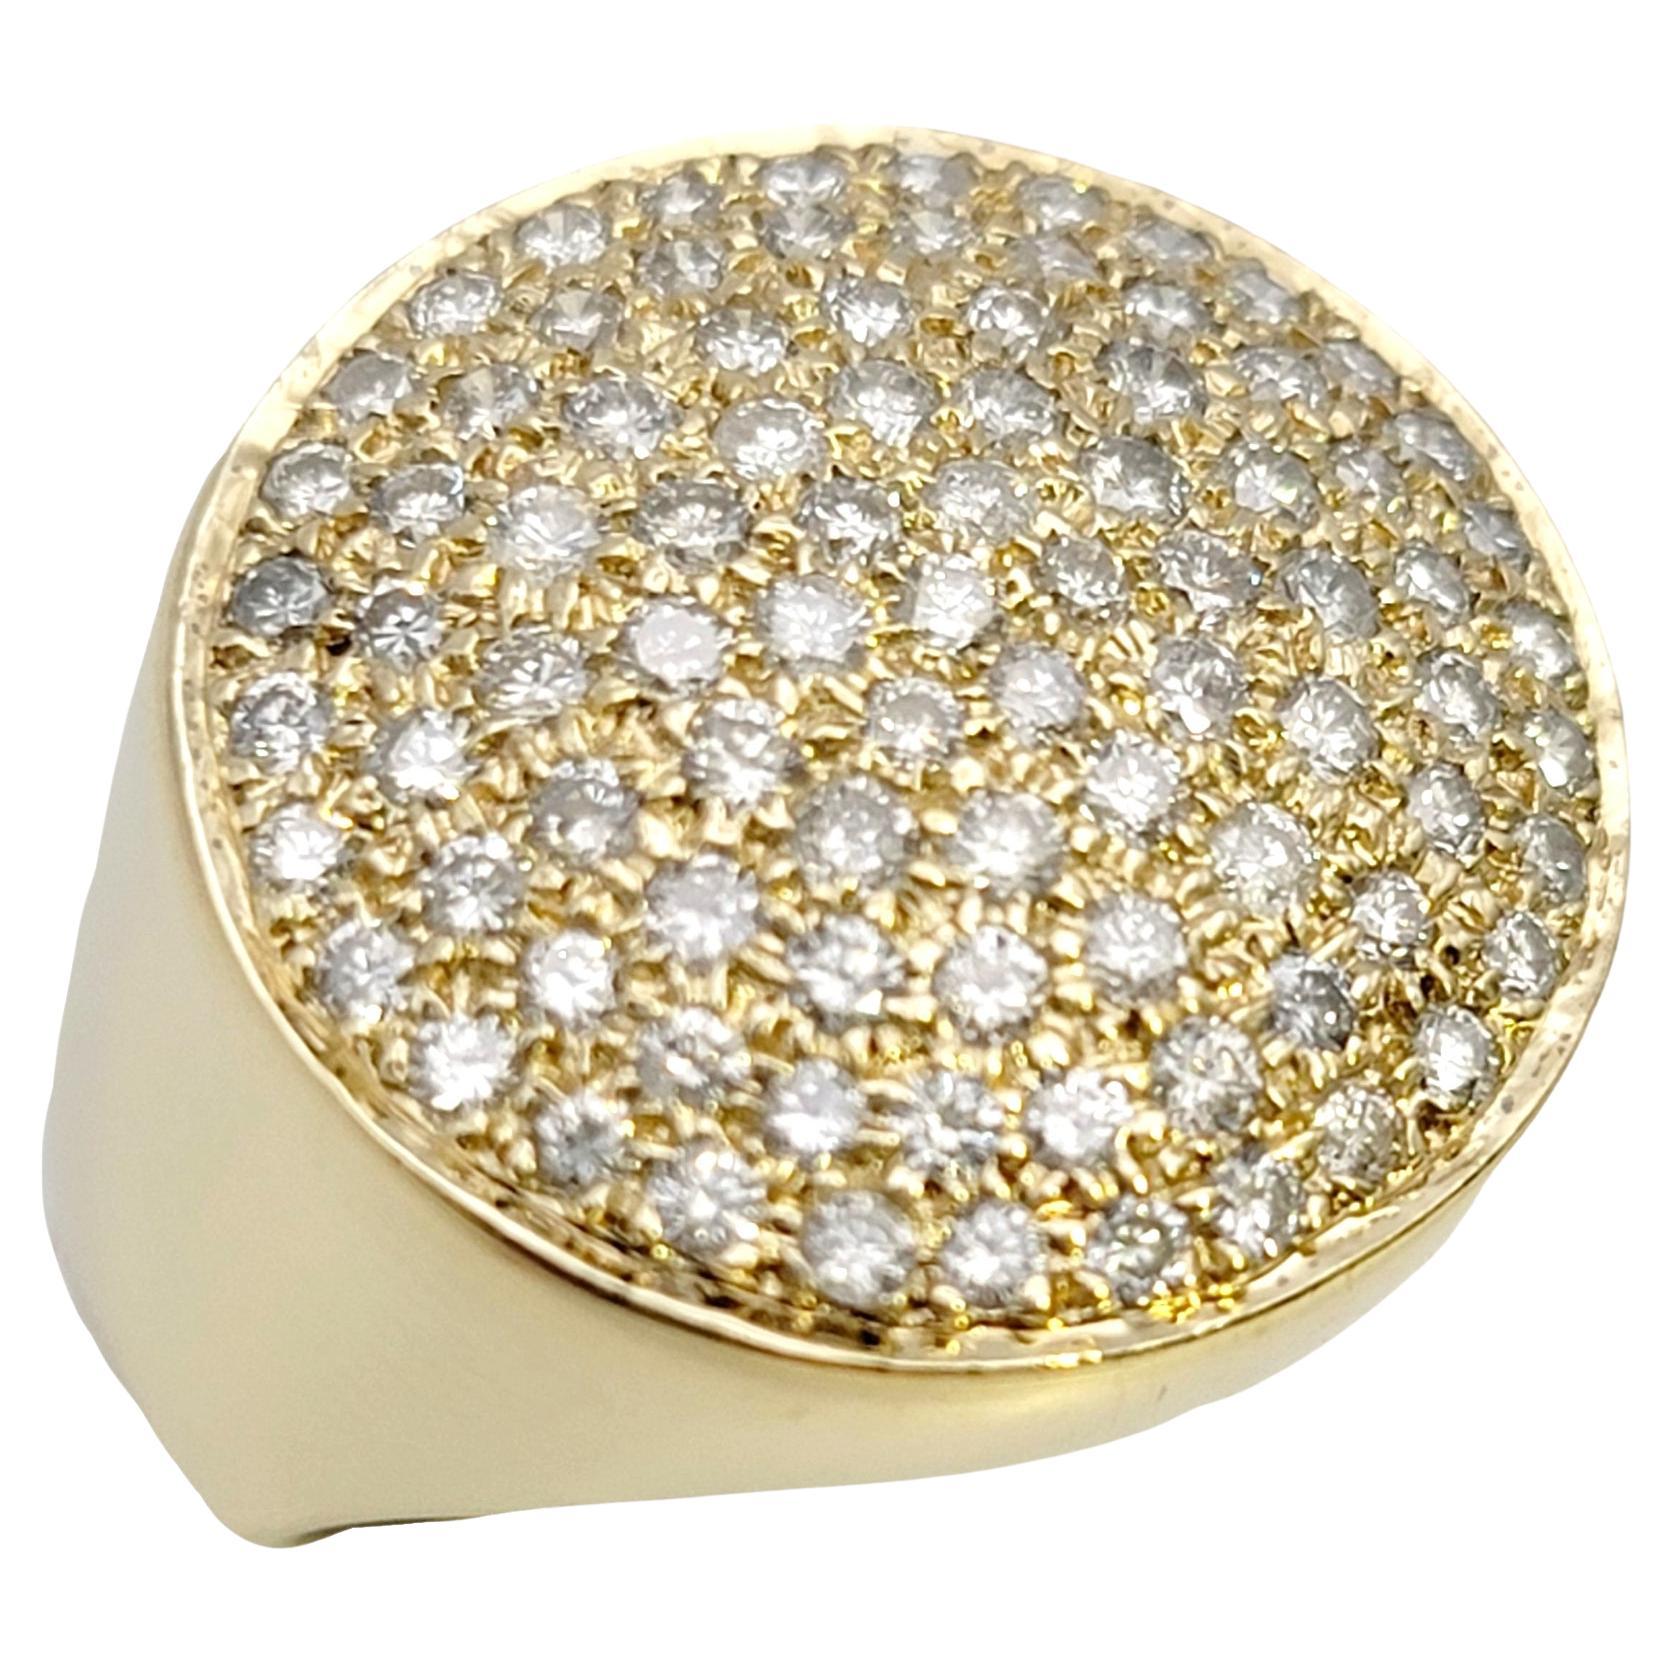 Ring size: 7

This bright, modern diamond disc ring absolutely glows on the finger. The shimmering stones on this fabulous statement ring give off an elegant, contemporary look without being over the top. You will wear it again and again!